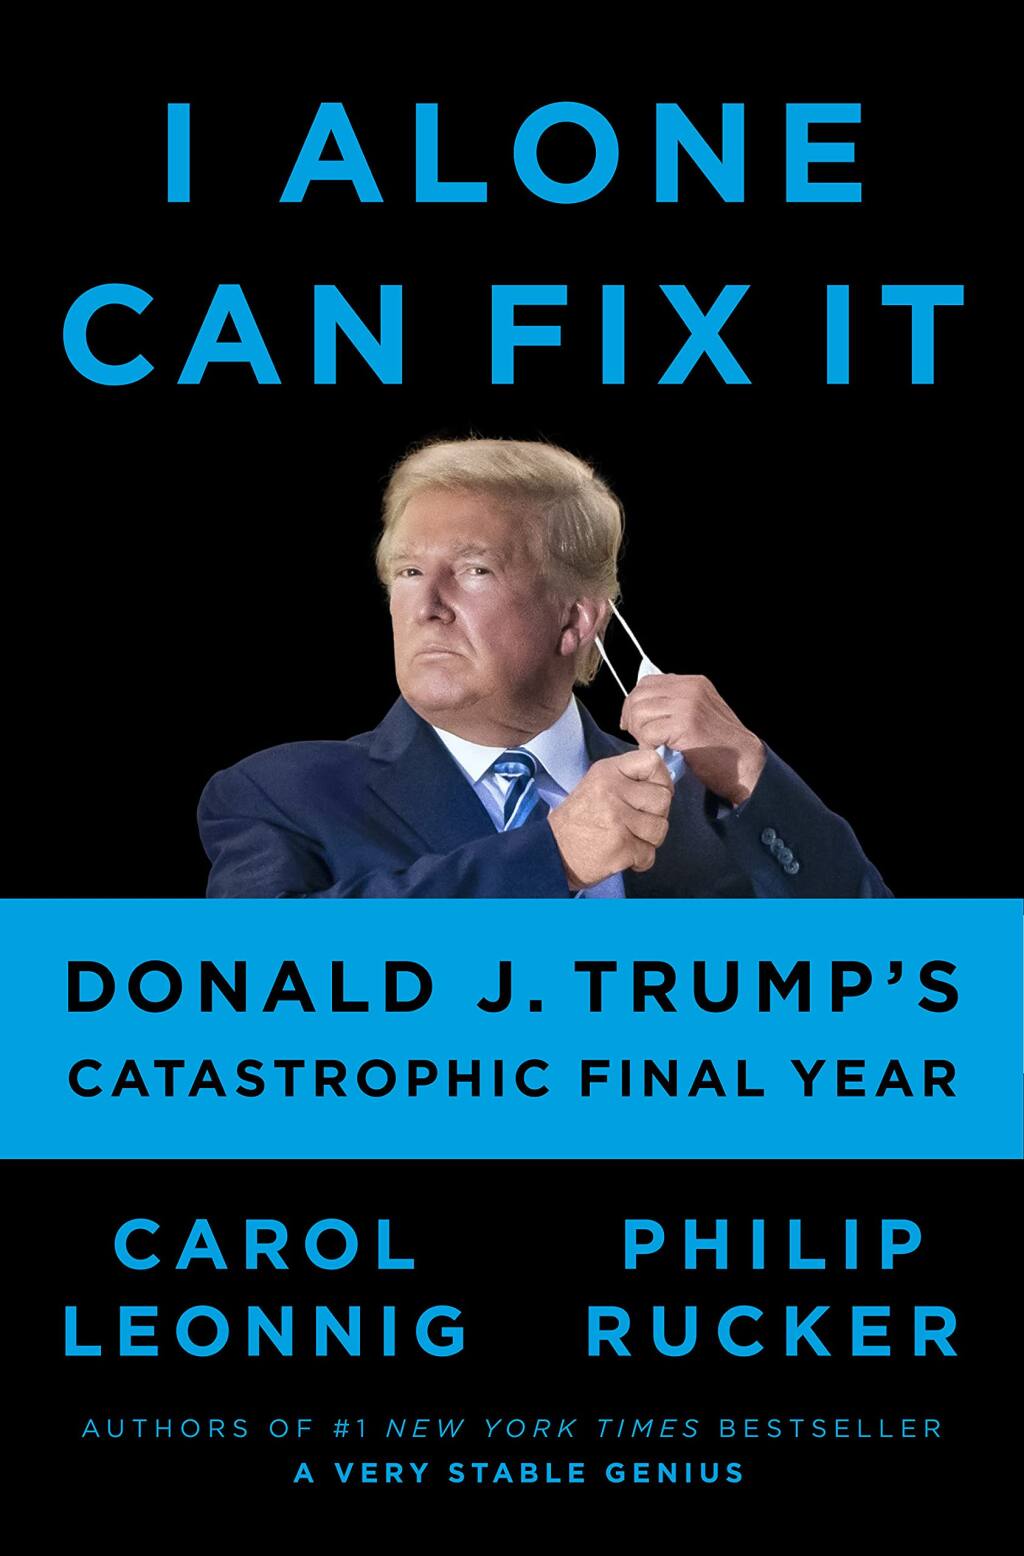 "I Alone Can Fix It.” by Carol Leonnig and Philip Rucker, is the No. 1 bestselling book in Petaluma this week (PENGUIN PRESS)